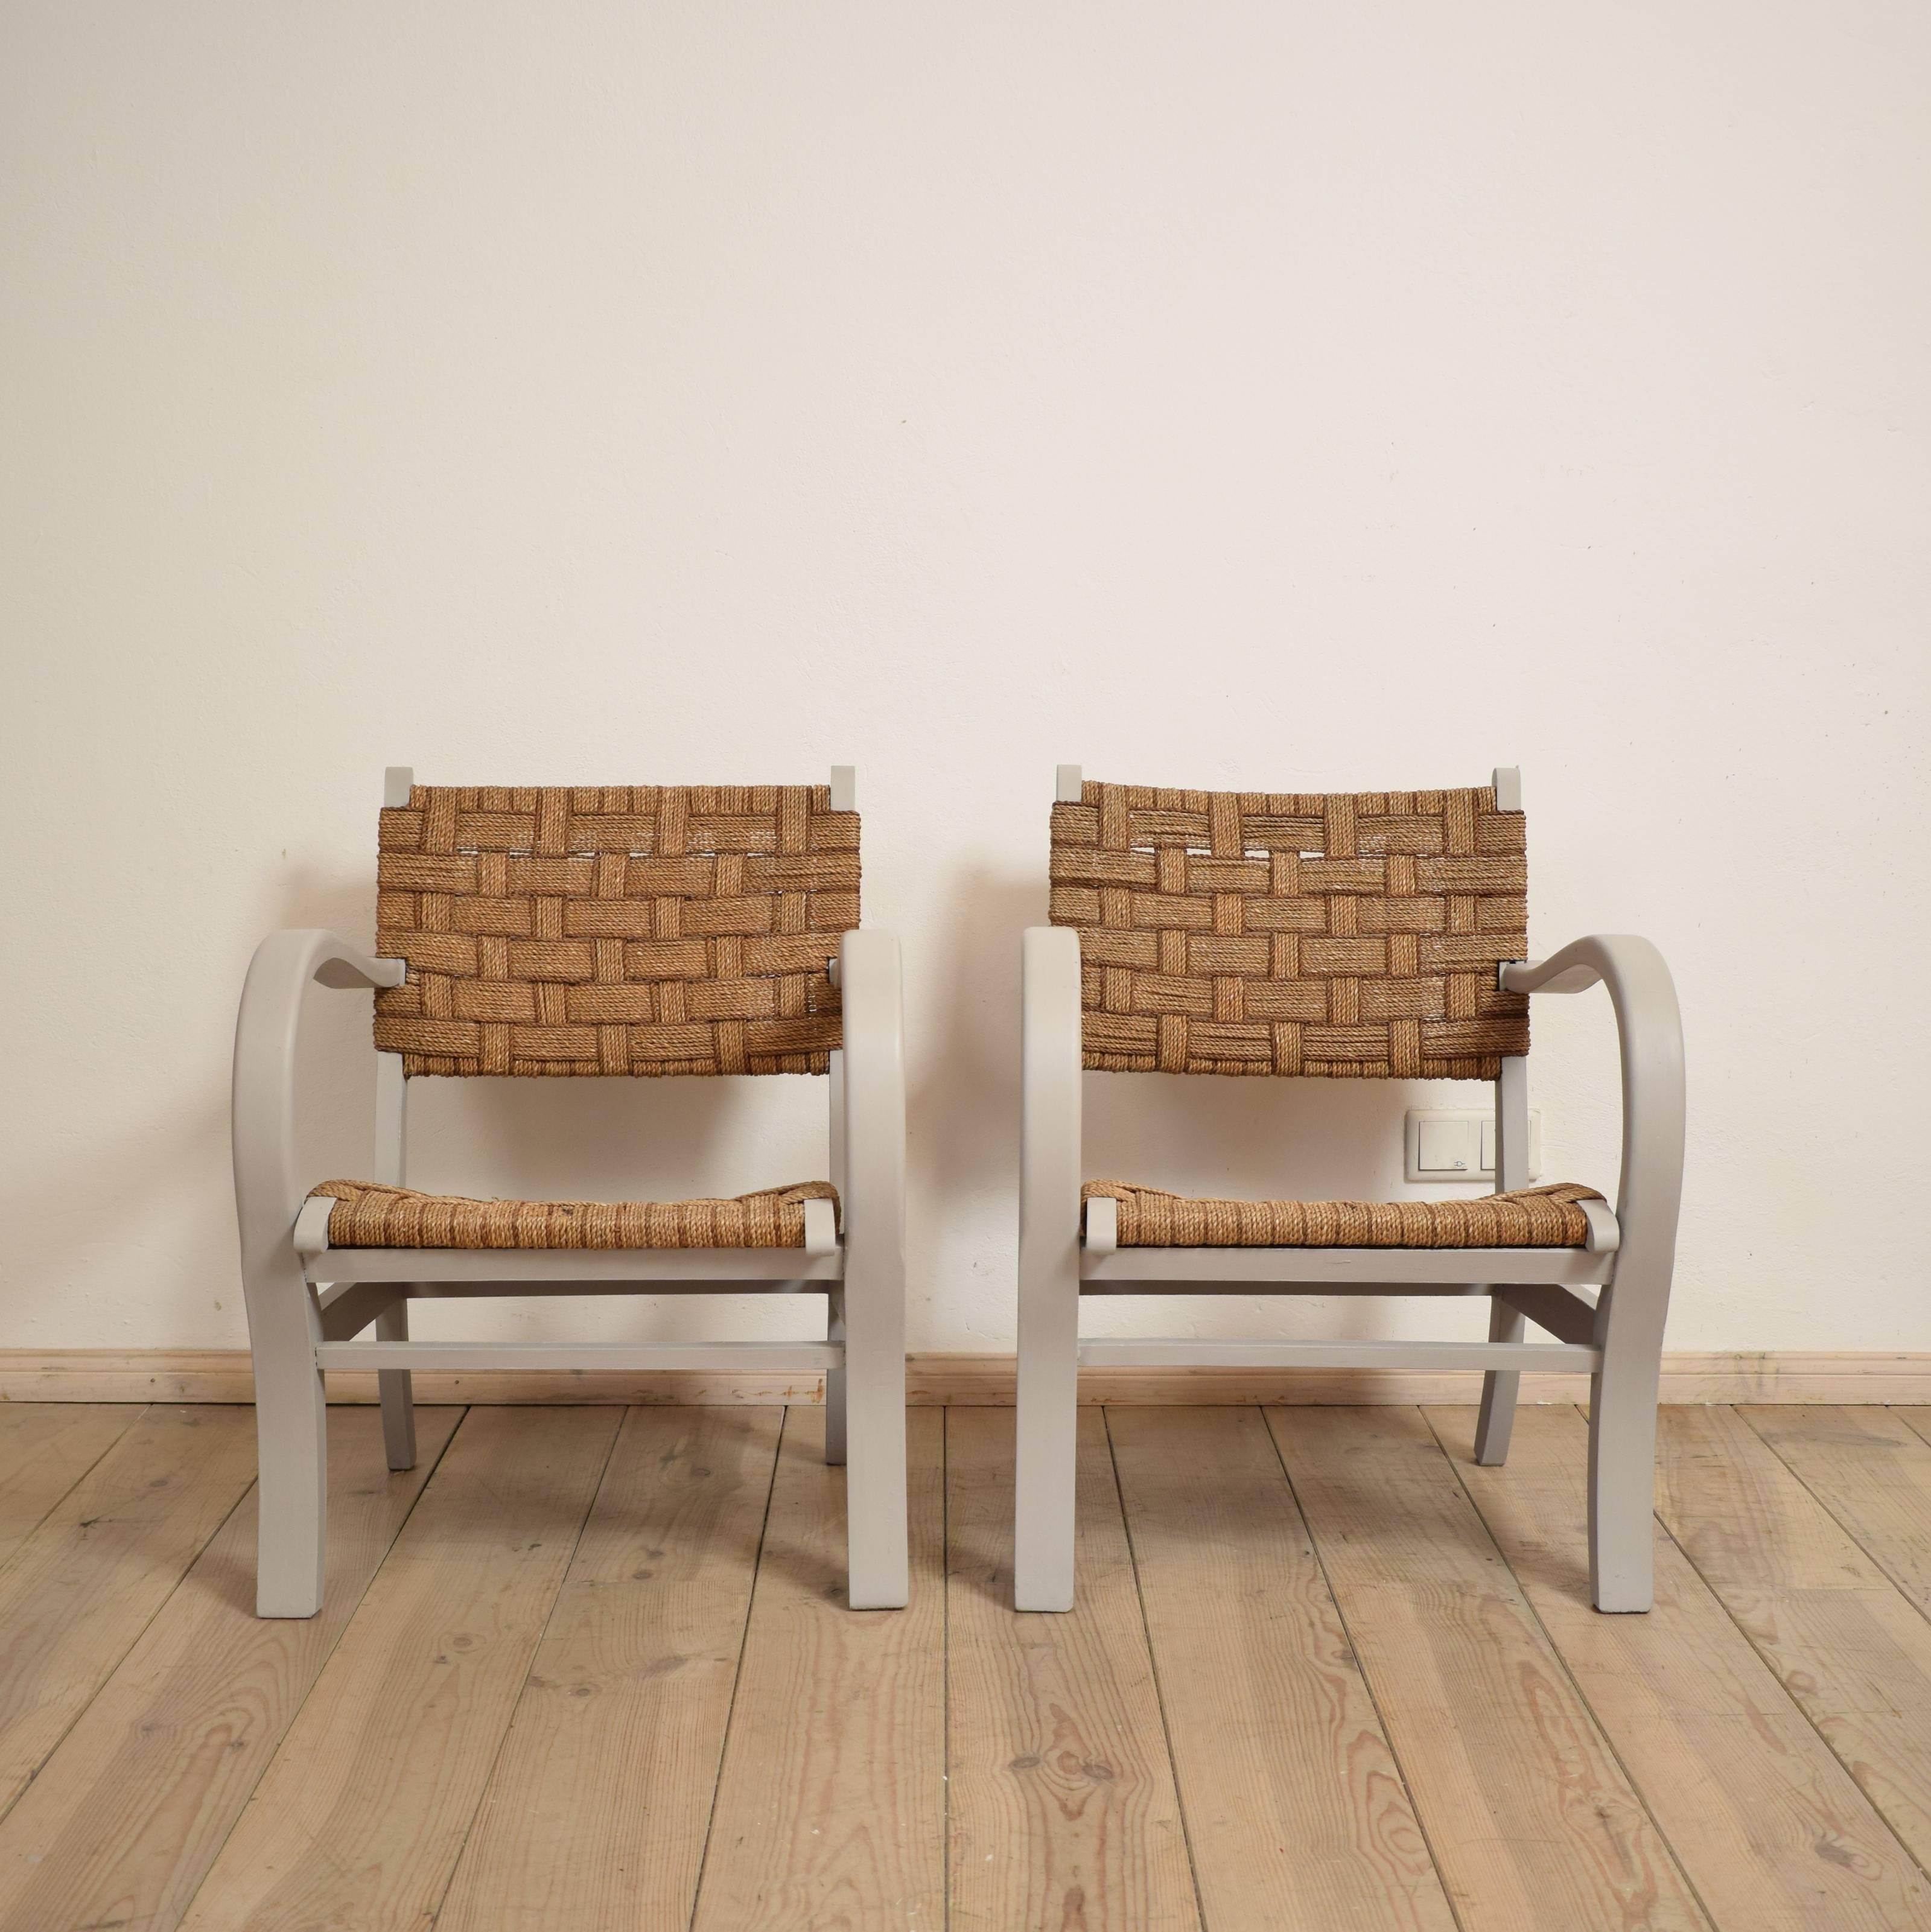 This pair of 1920 armchairs by Erich Dieckmann are painted in a grey chalk paint and remain their original canework.
The chairs were made in the Bauhaus era and have the typical simple design.
Great pair of armchairs which are very comfortable and